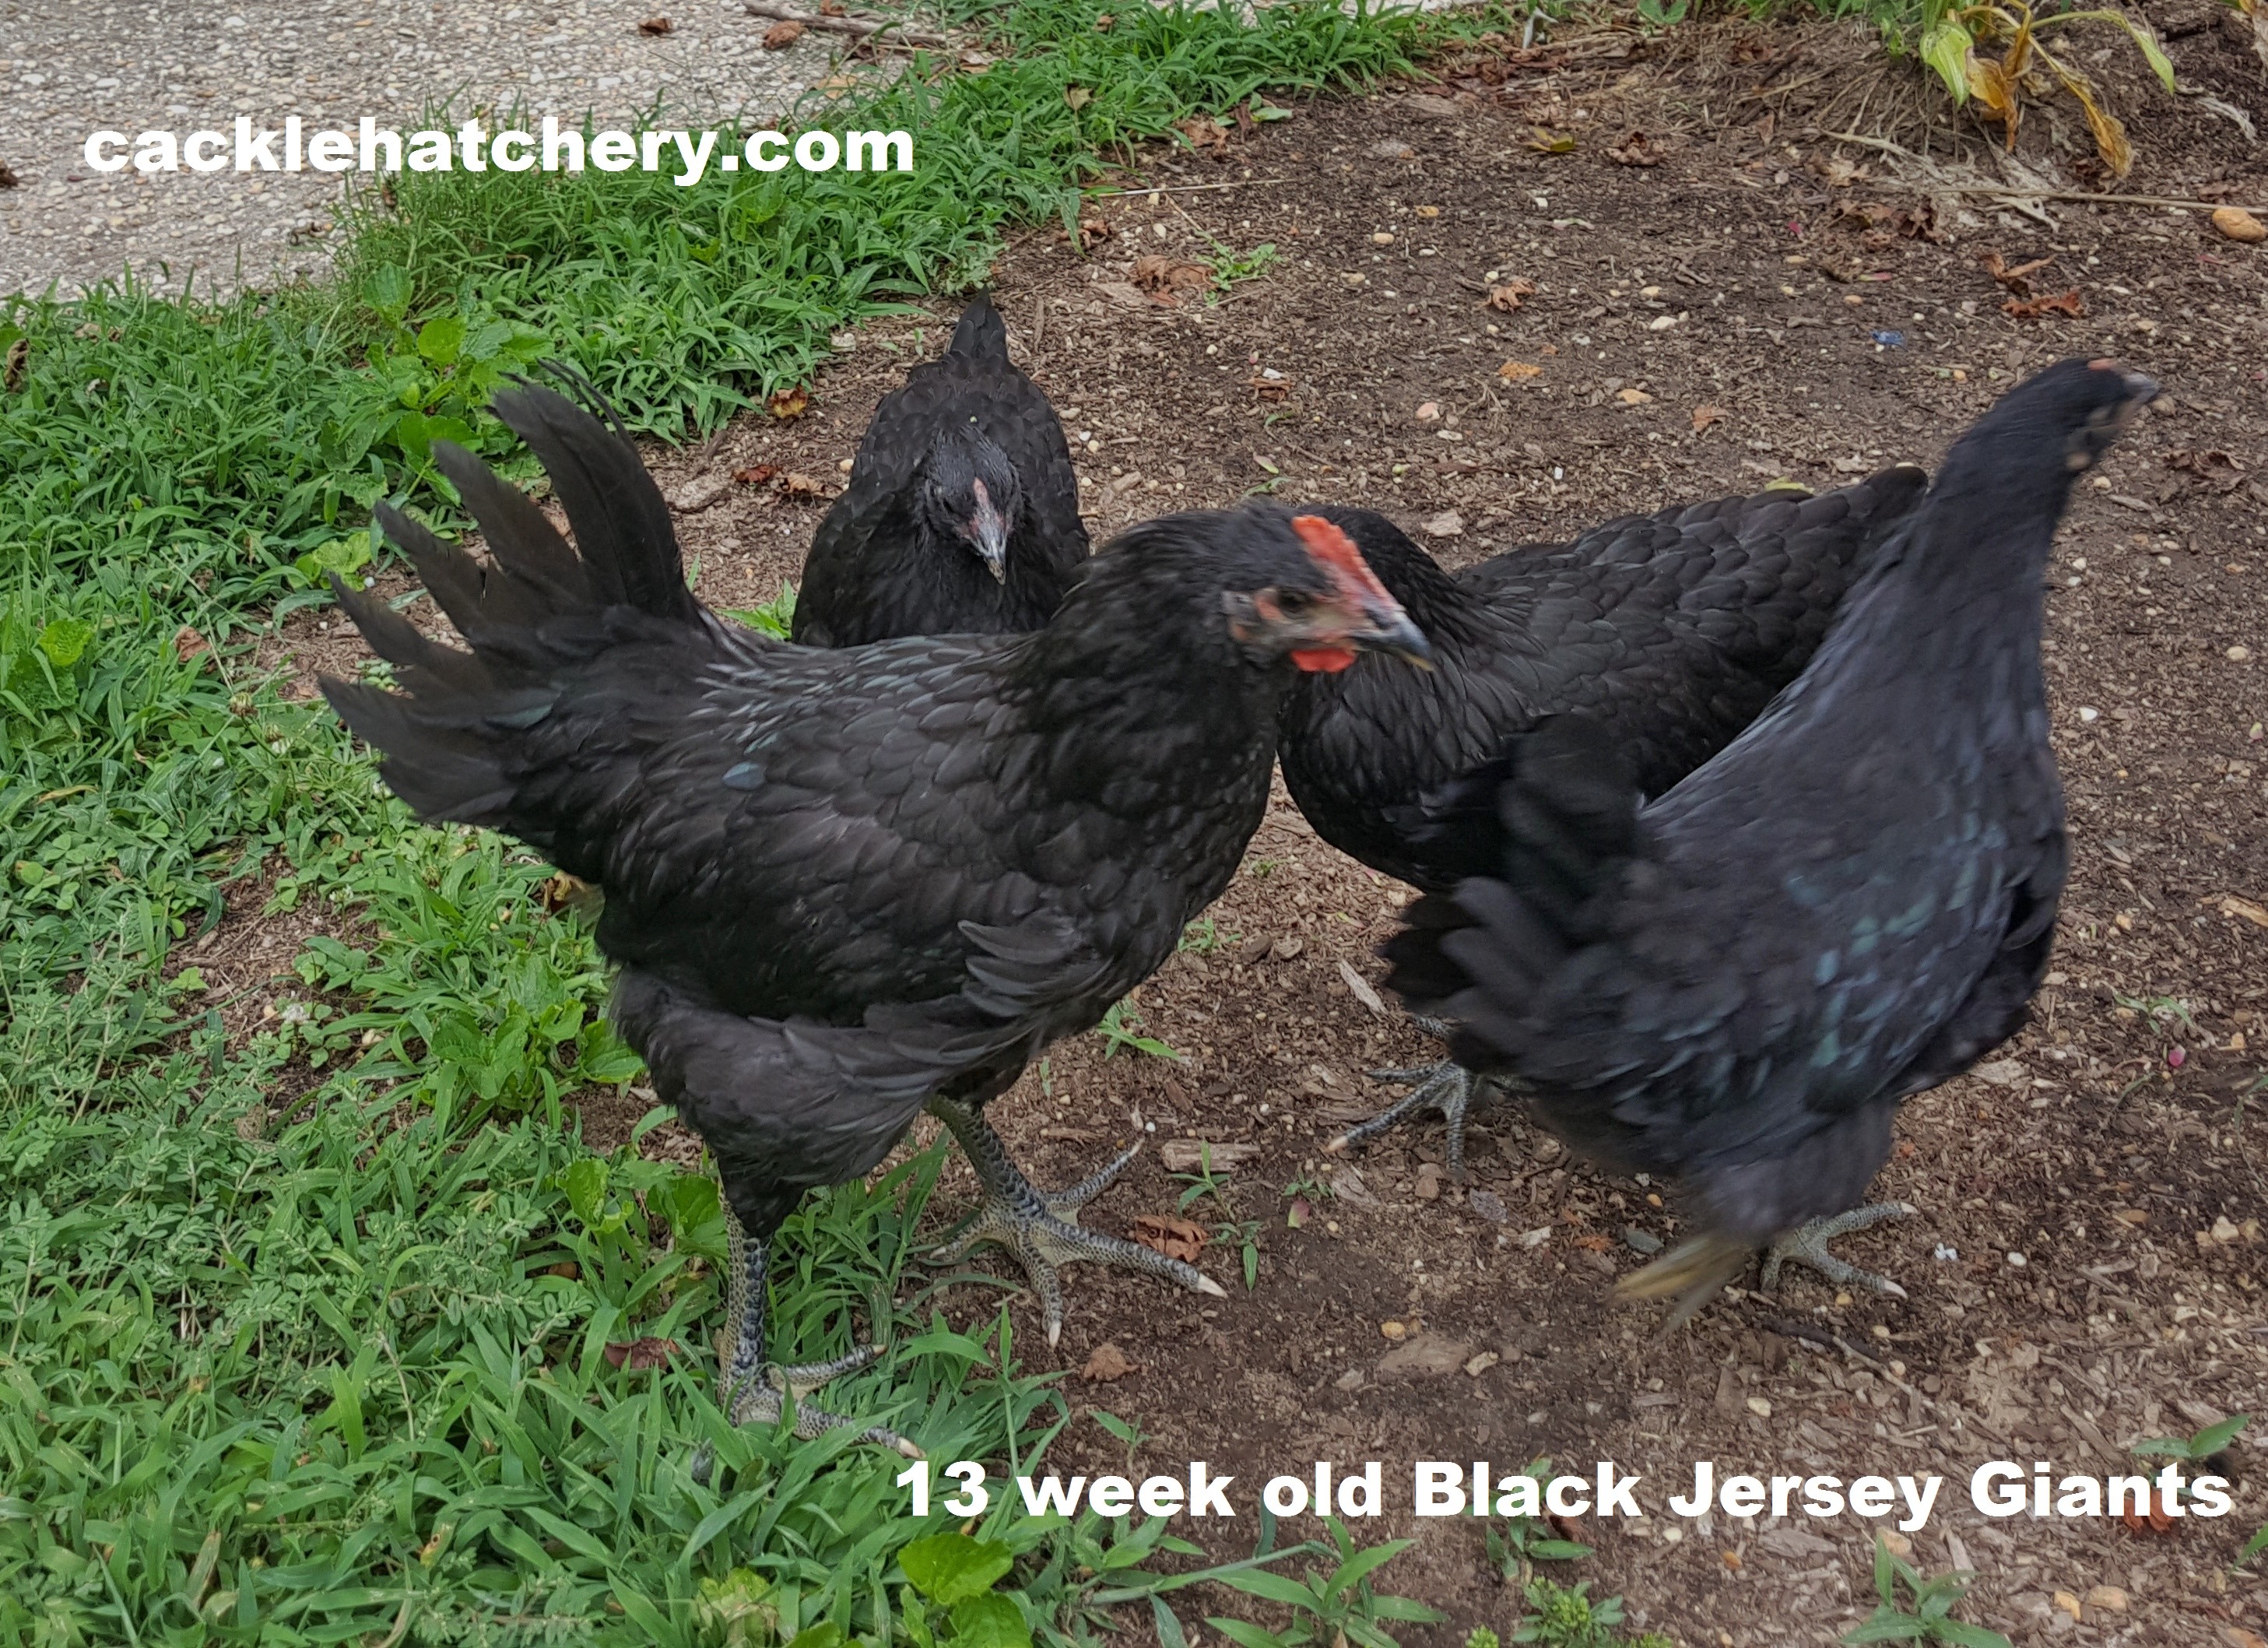 Black Jersey Giant Chickens - Baby Chicks for Sale | Cackle Hatchery